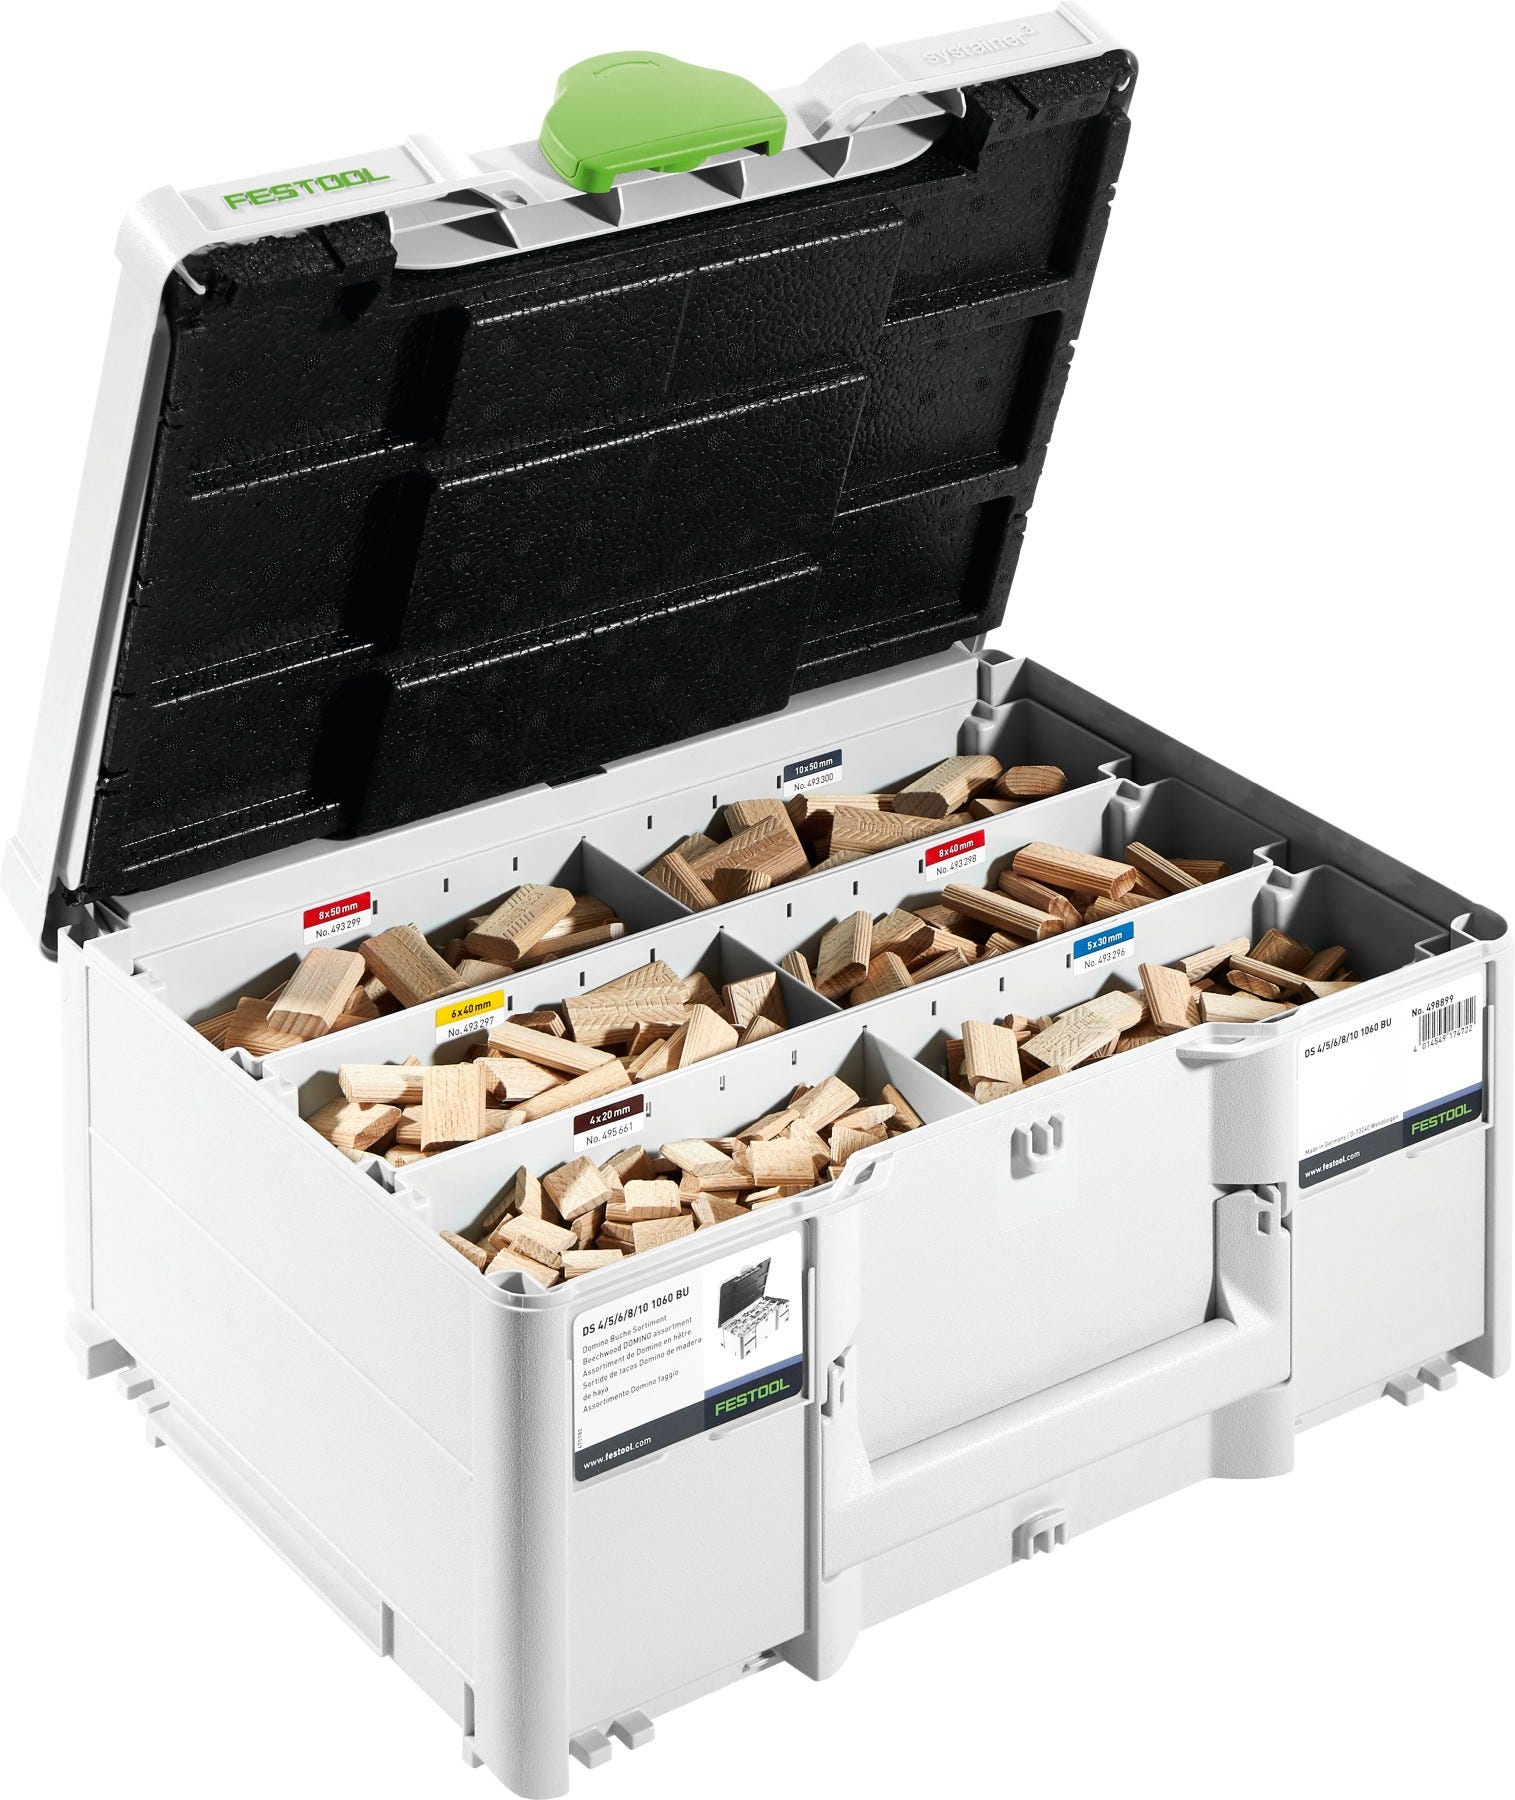 Festool 576794 Domino DF 500 1,060-Piece Tenon Assortment Systainer3 with  Cutters